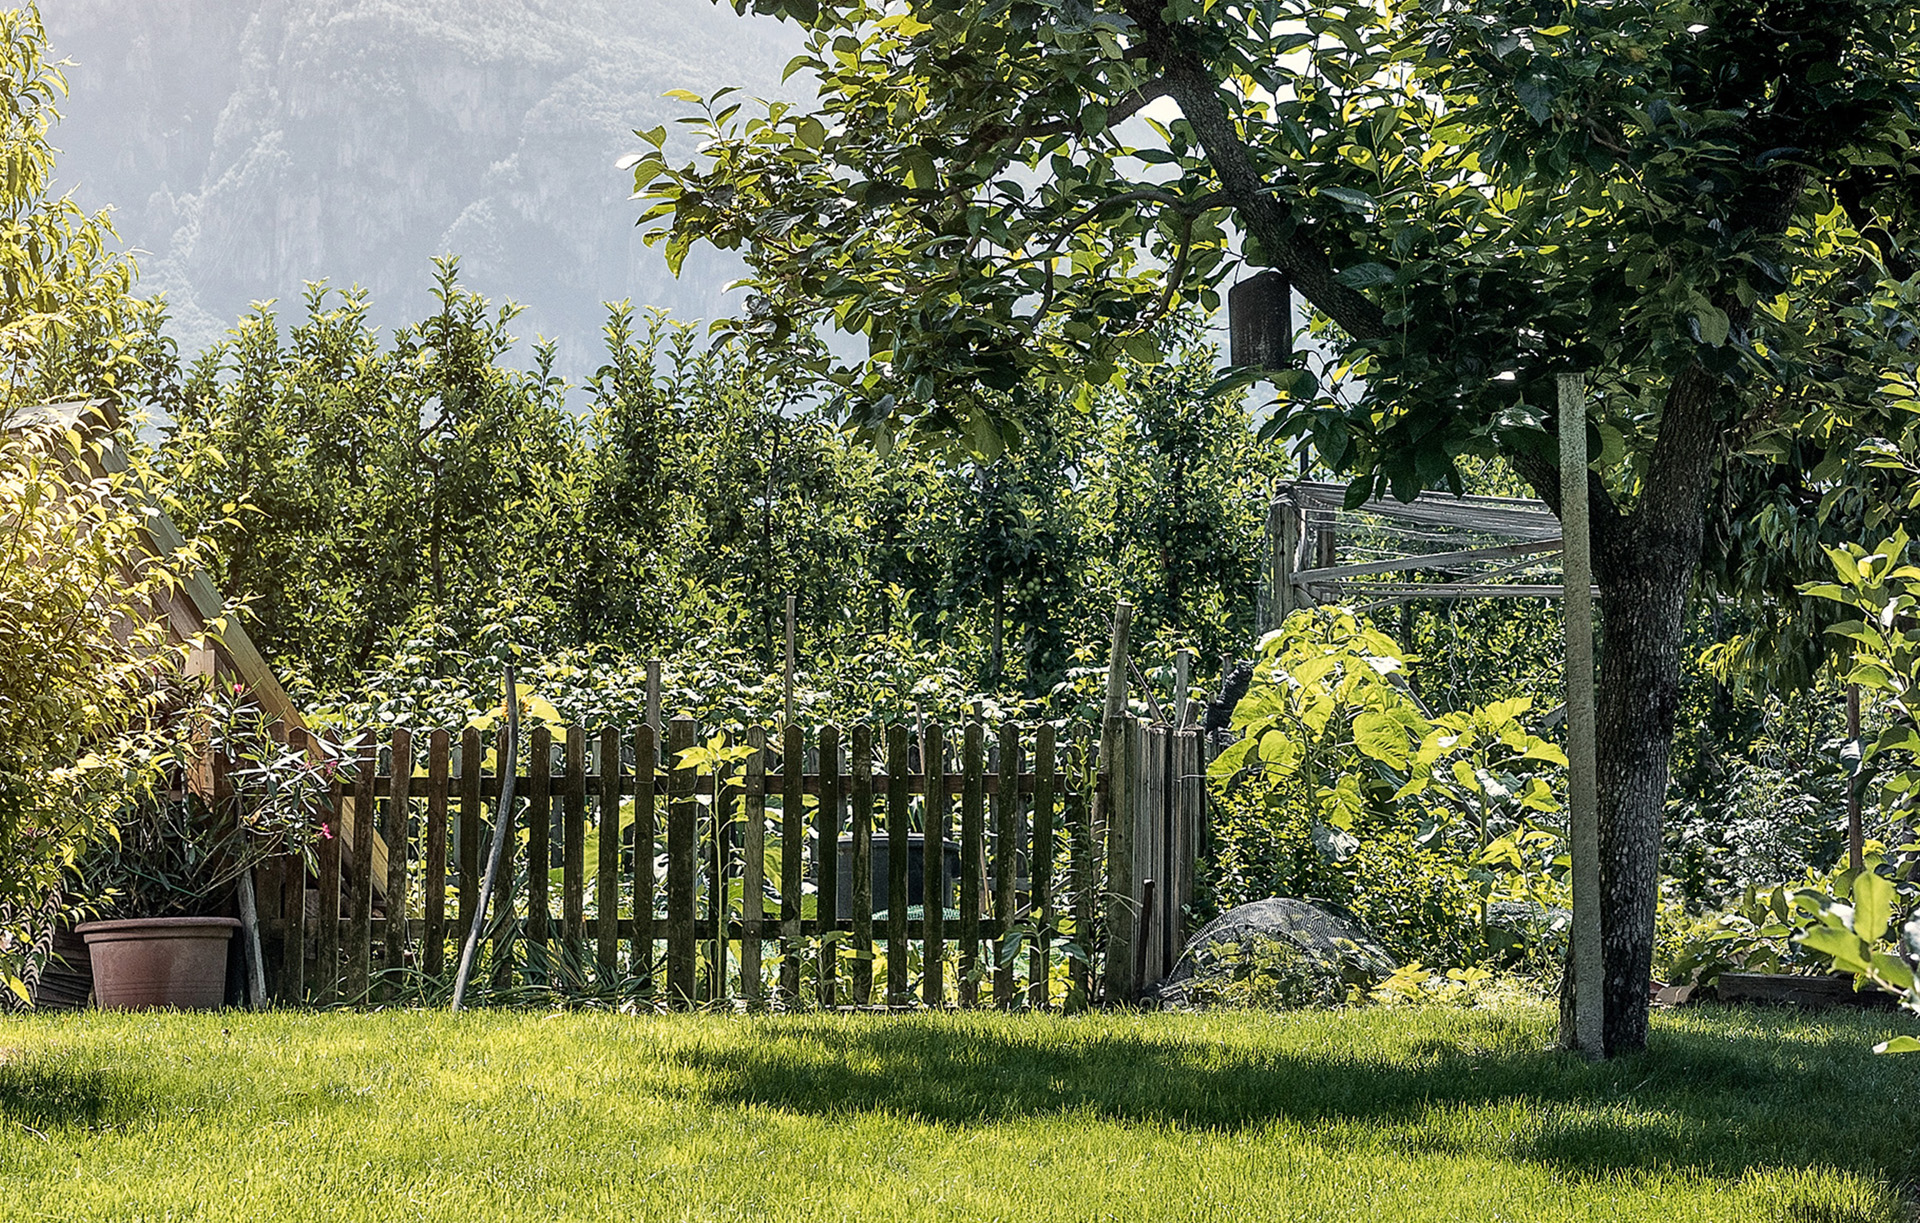 Small garden with lawn at the front, bushes on both sides, fence in the middle, trees and mountains in the background.